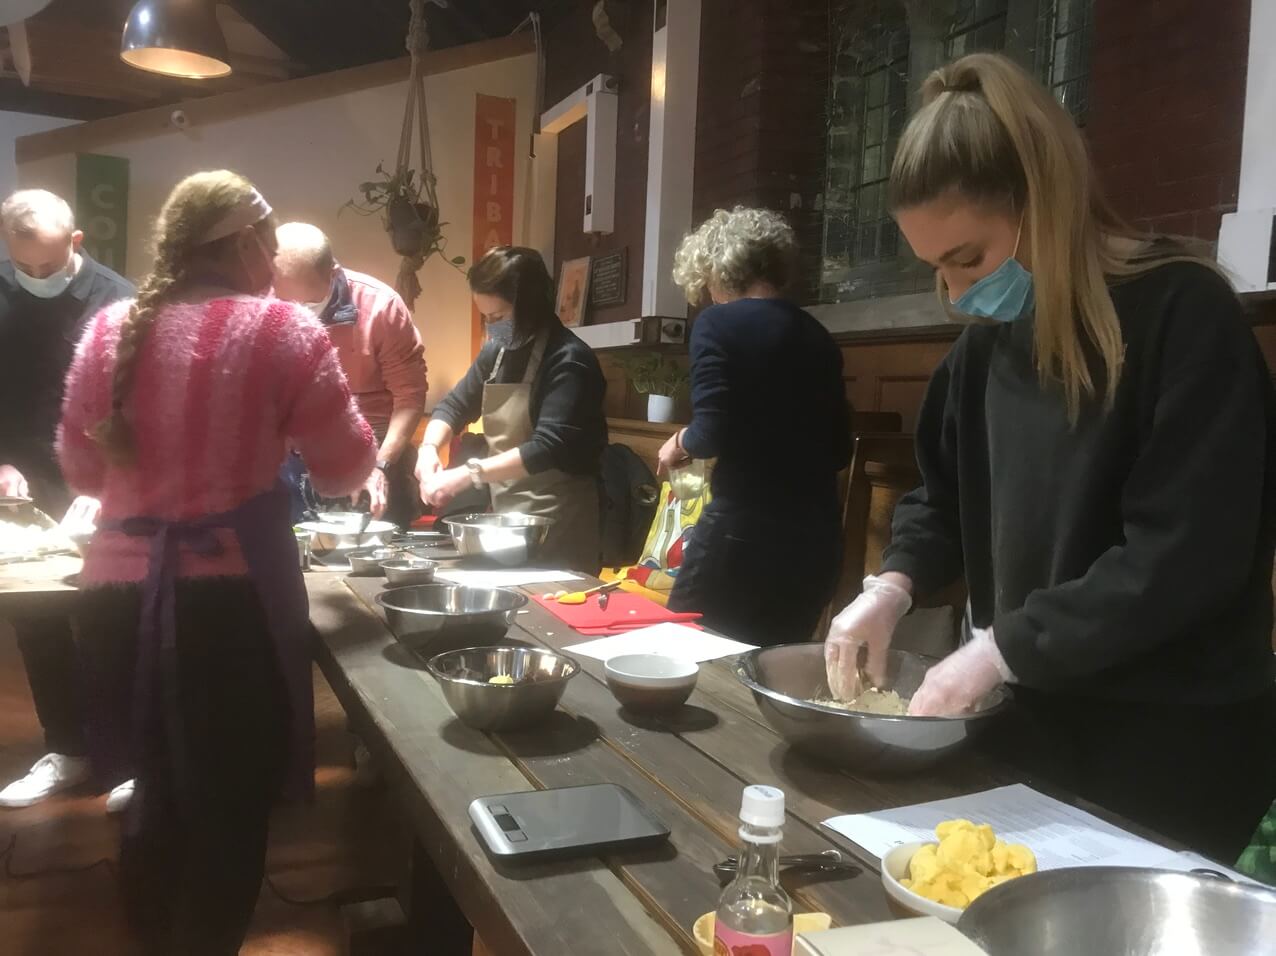 Rusdian Cookery event - People participating